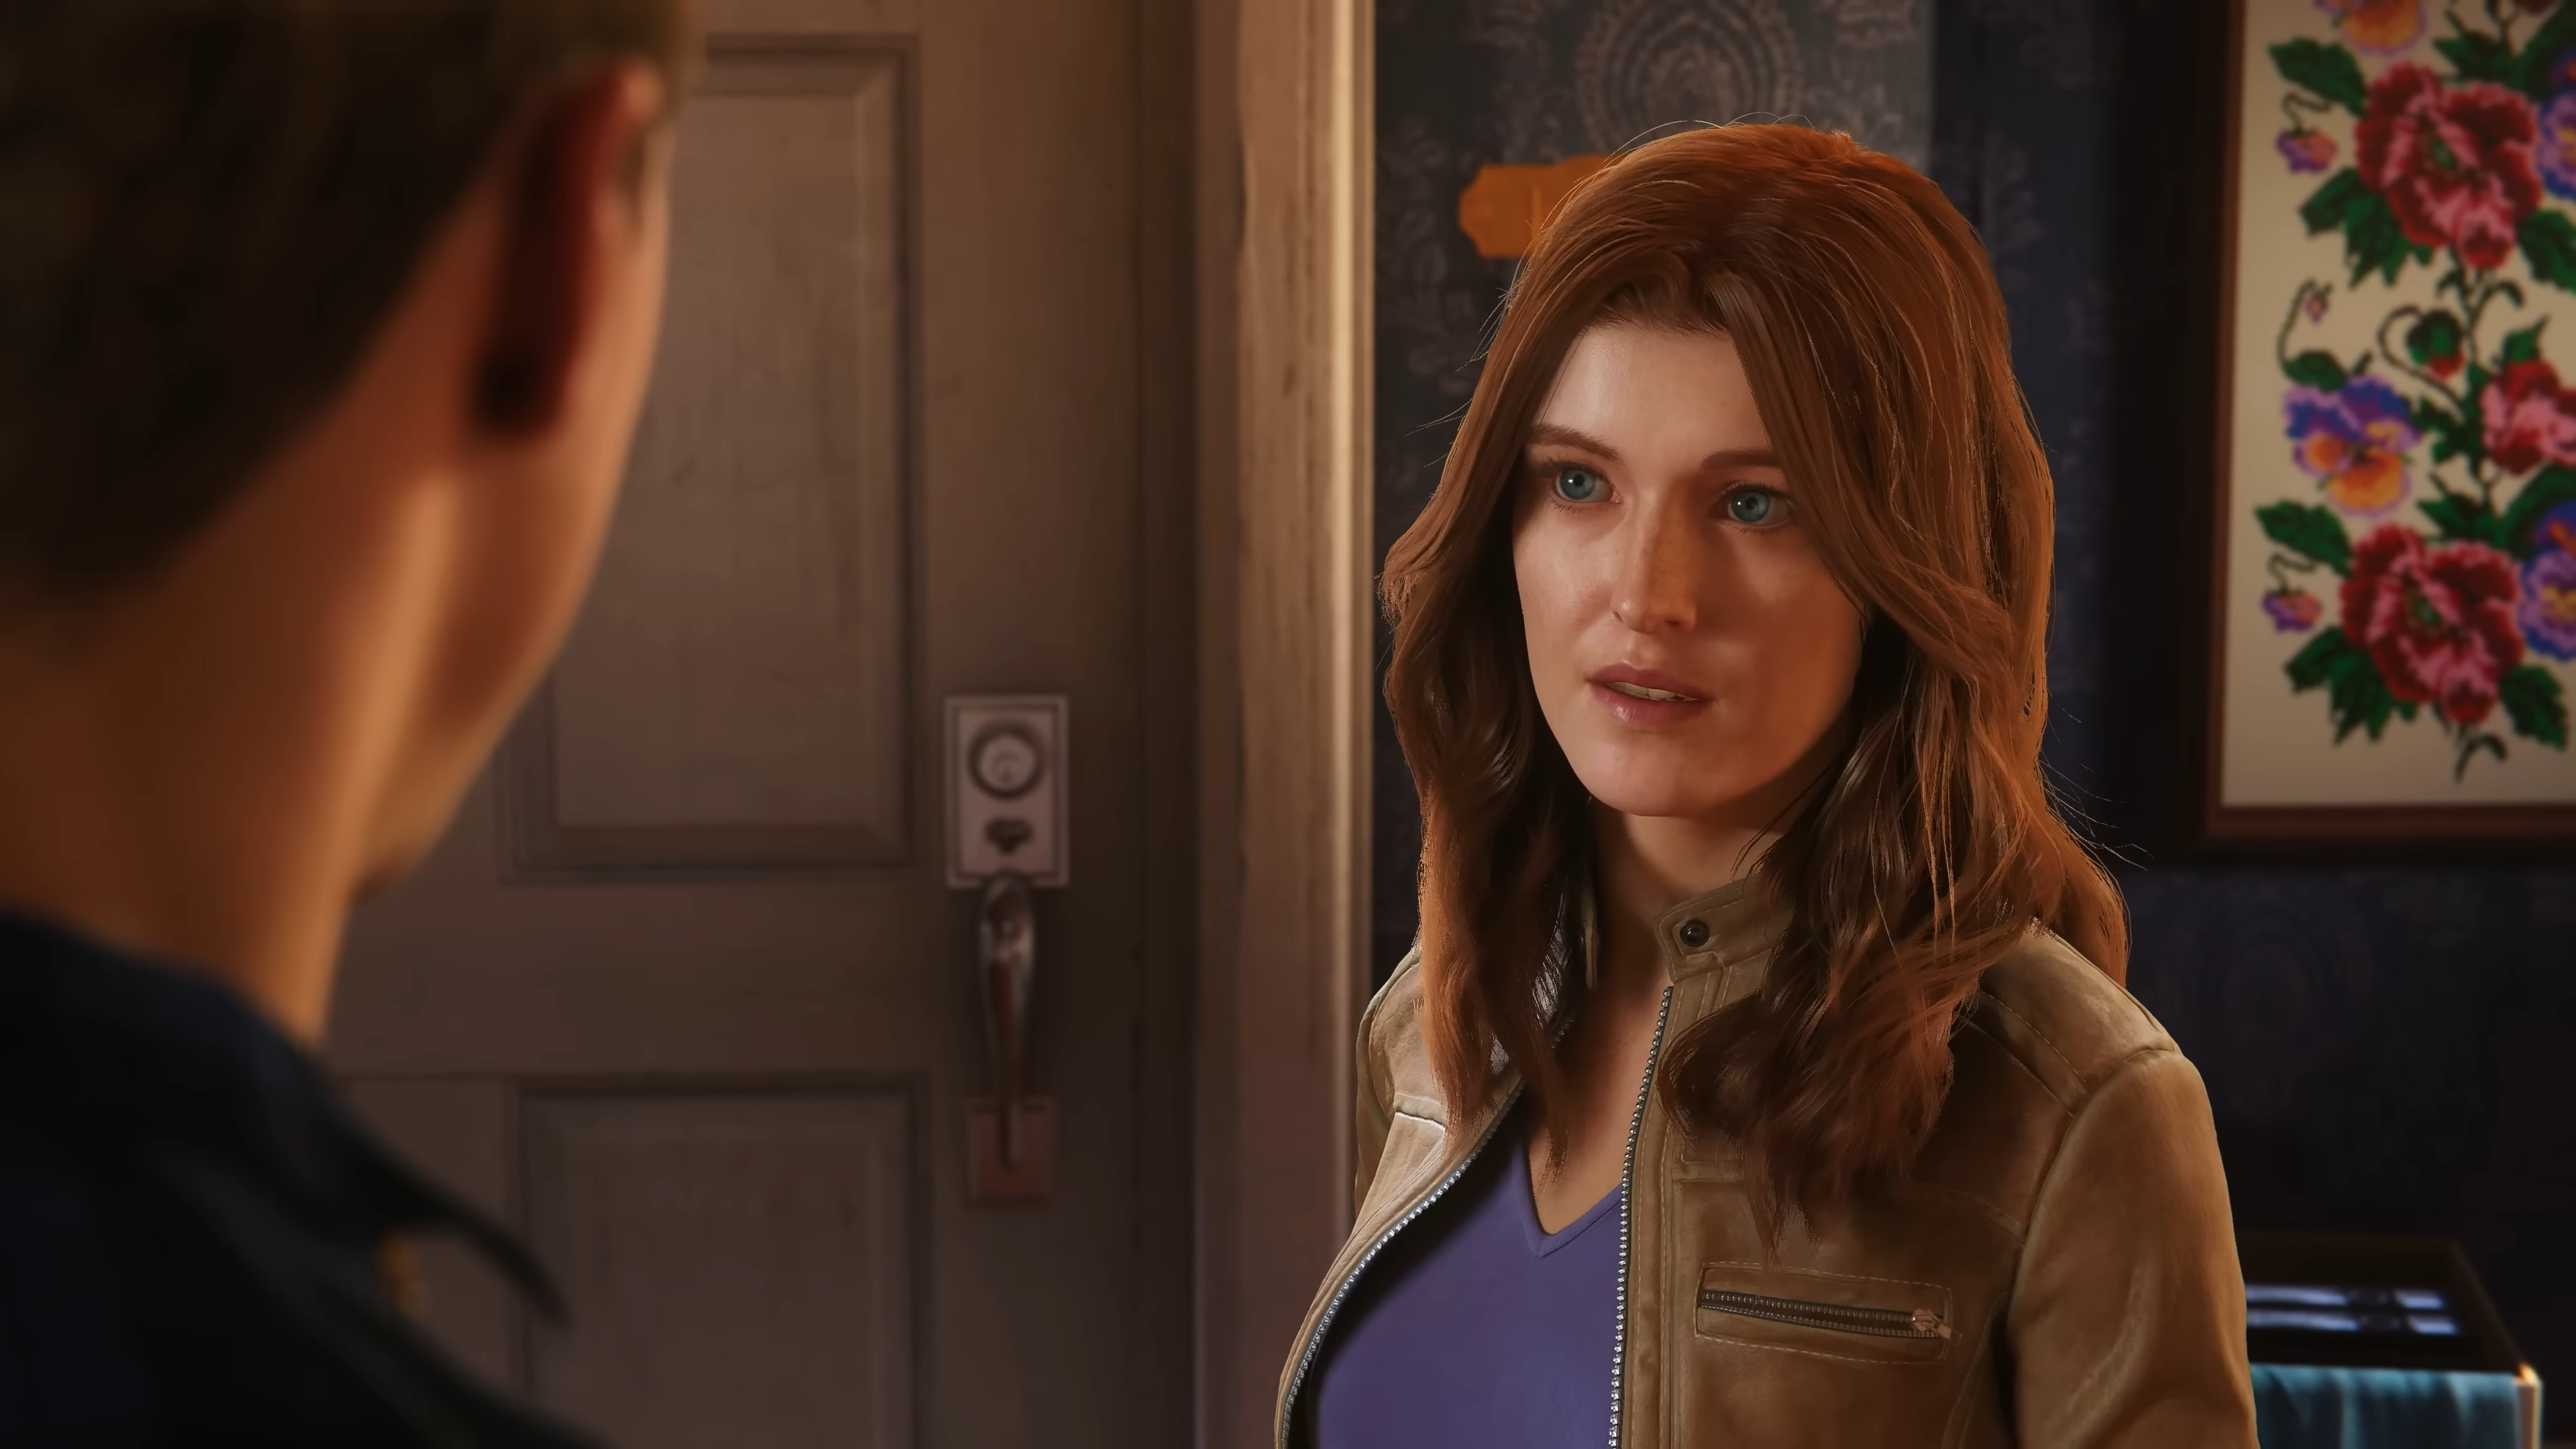 Mary Jane Watson takes center stage as a playable character in Marvel's Spider-Man 2, showcasing Insomniac Games' dedication to her iconic role in the Spider-Man universe.